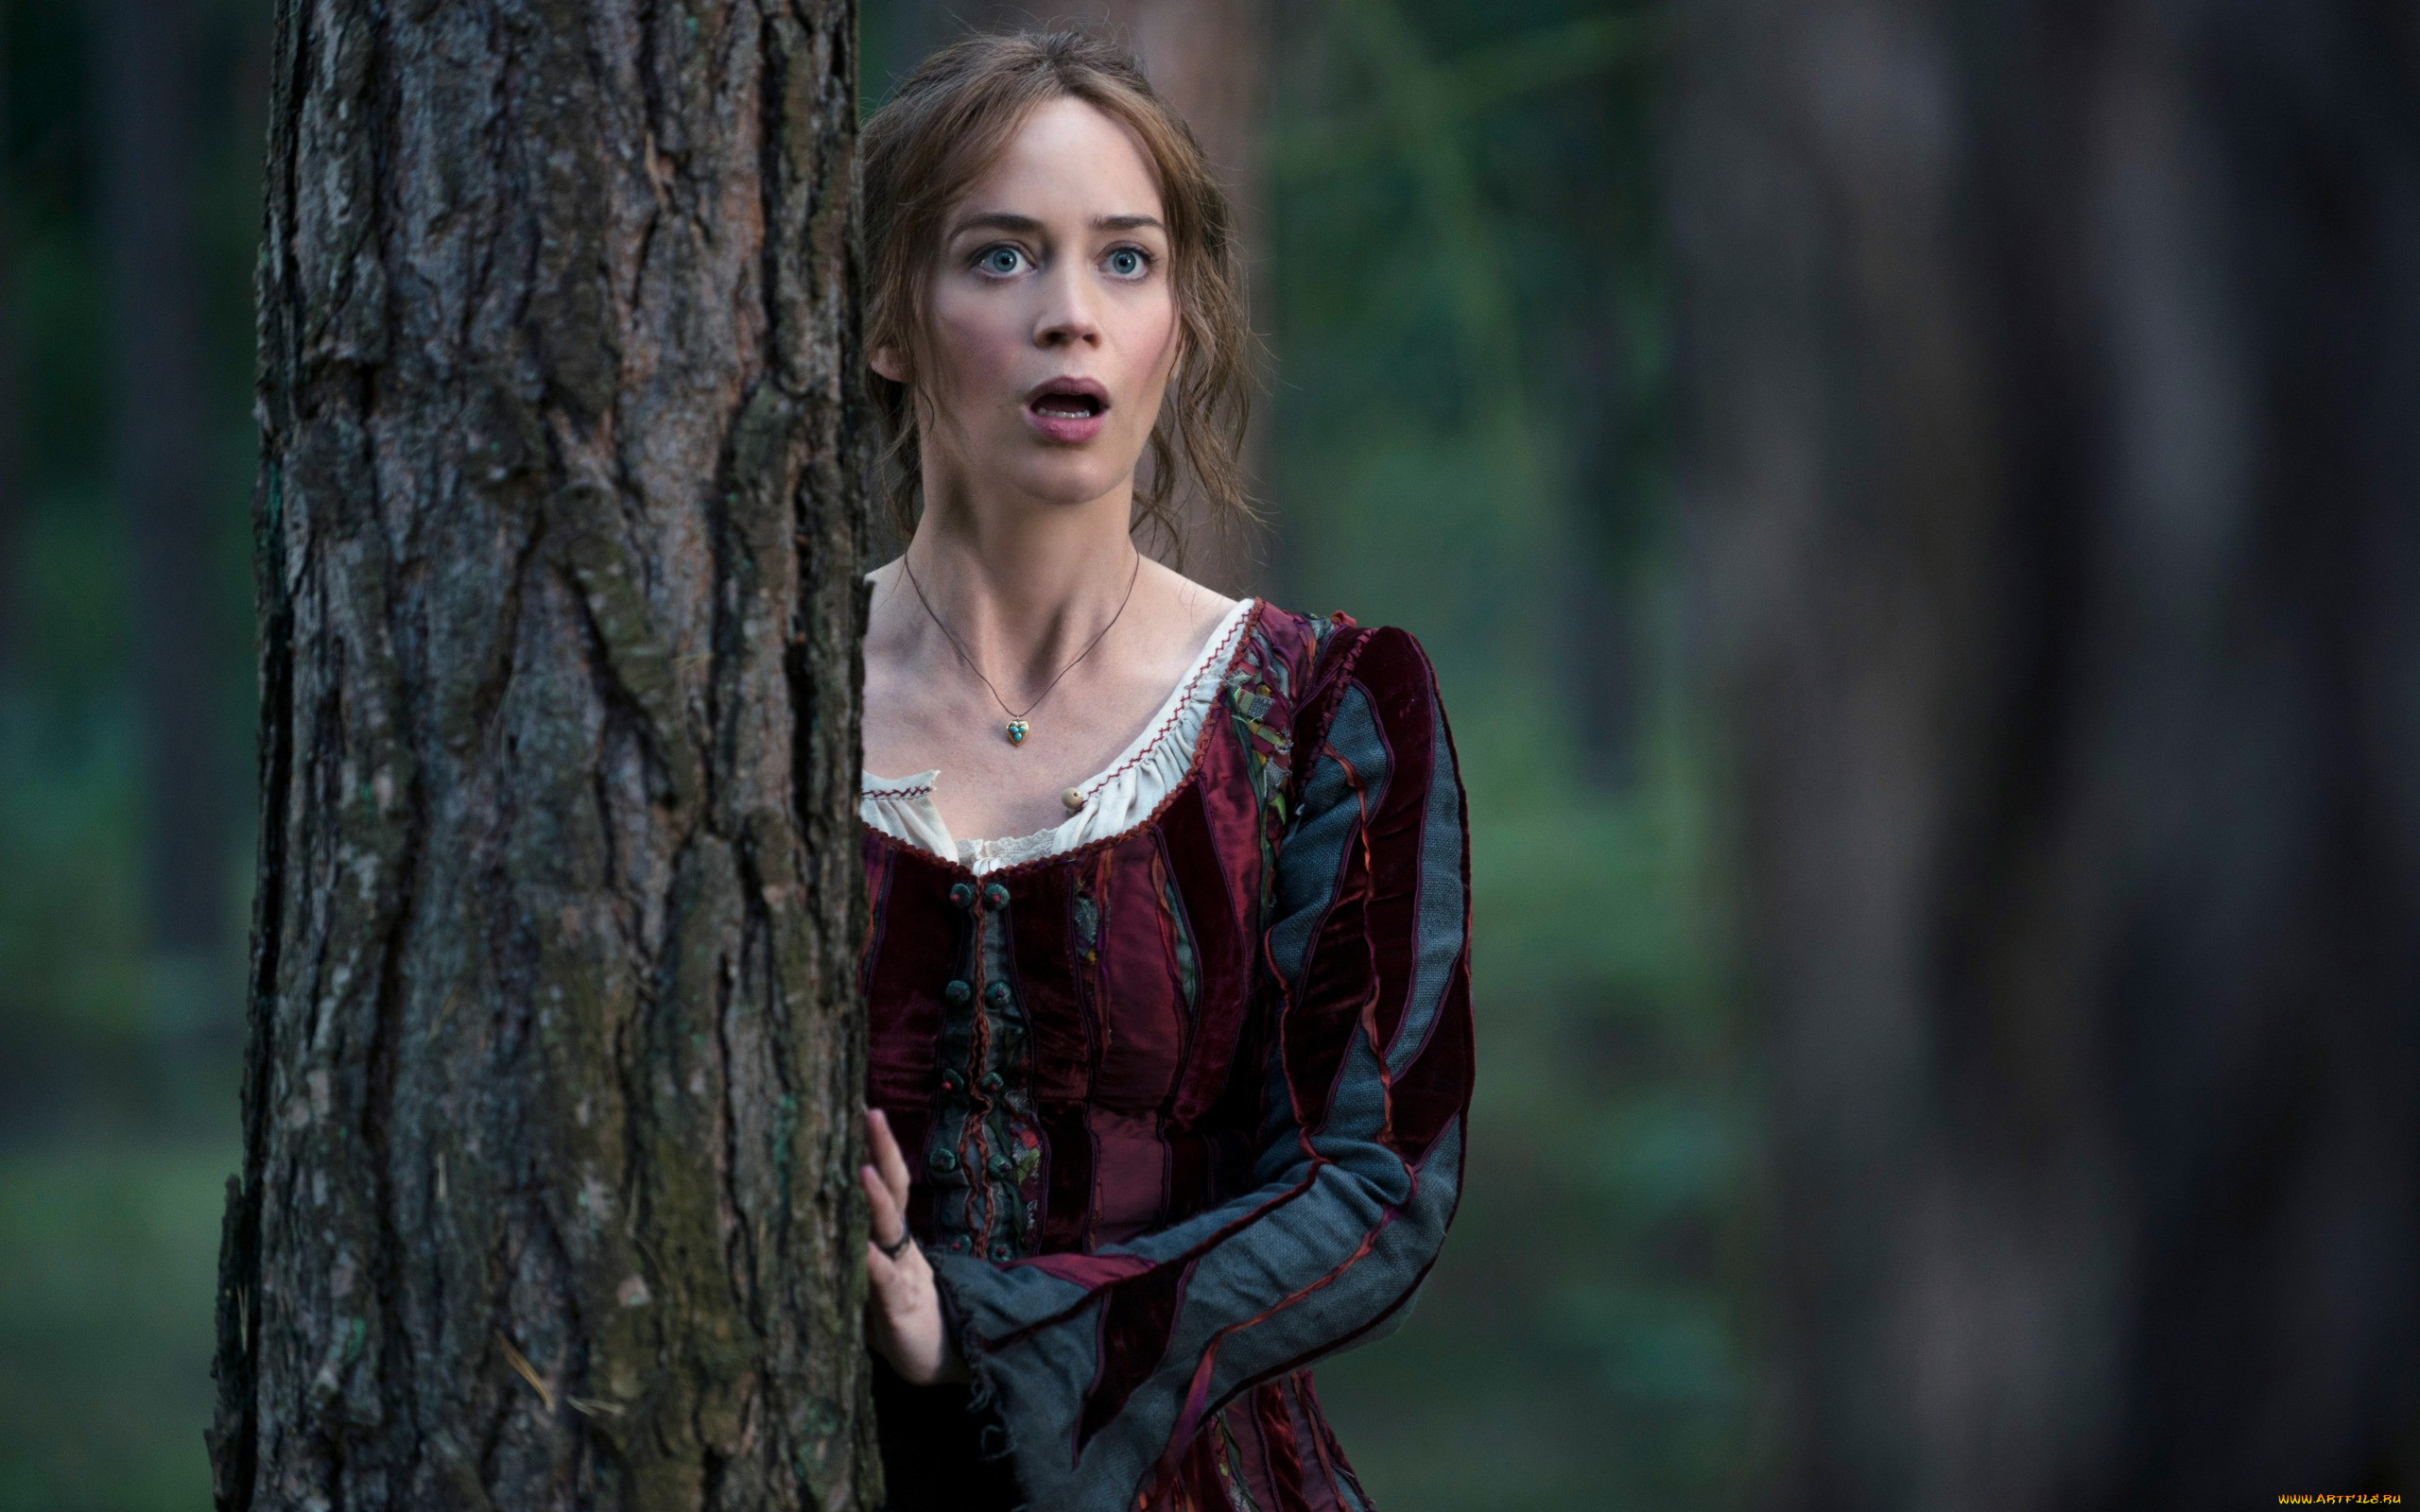  , into the woods, emily, blunt, , , , , into, the, woods